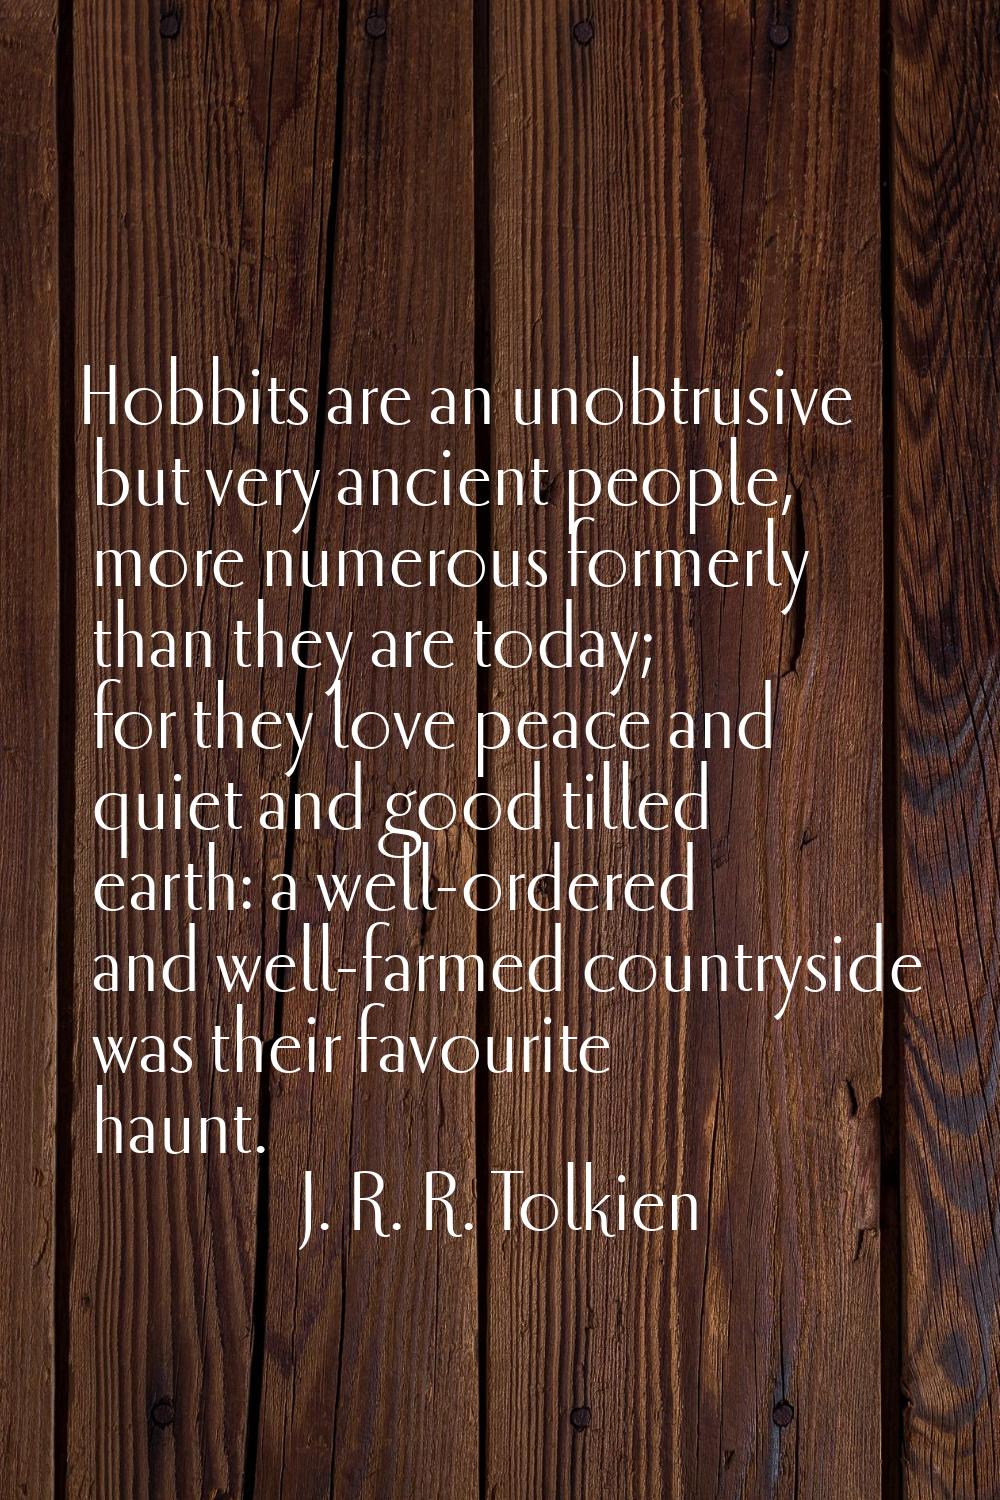 Hobbits are an unobtrusive but very ancient people, more numerous formerly than they are today; for